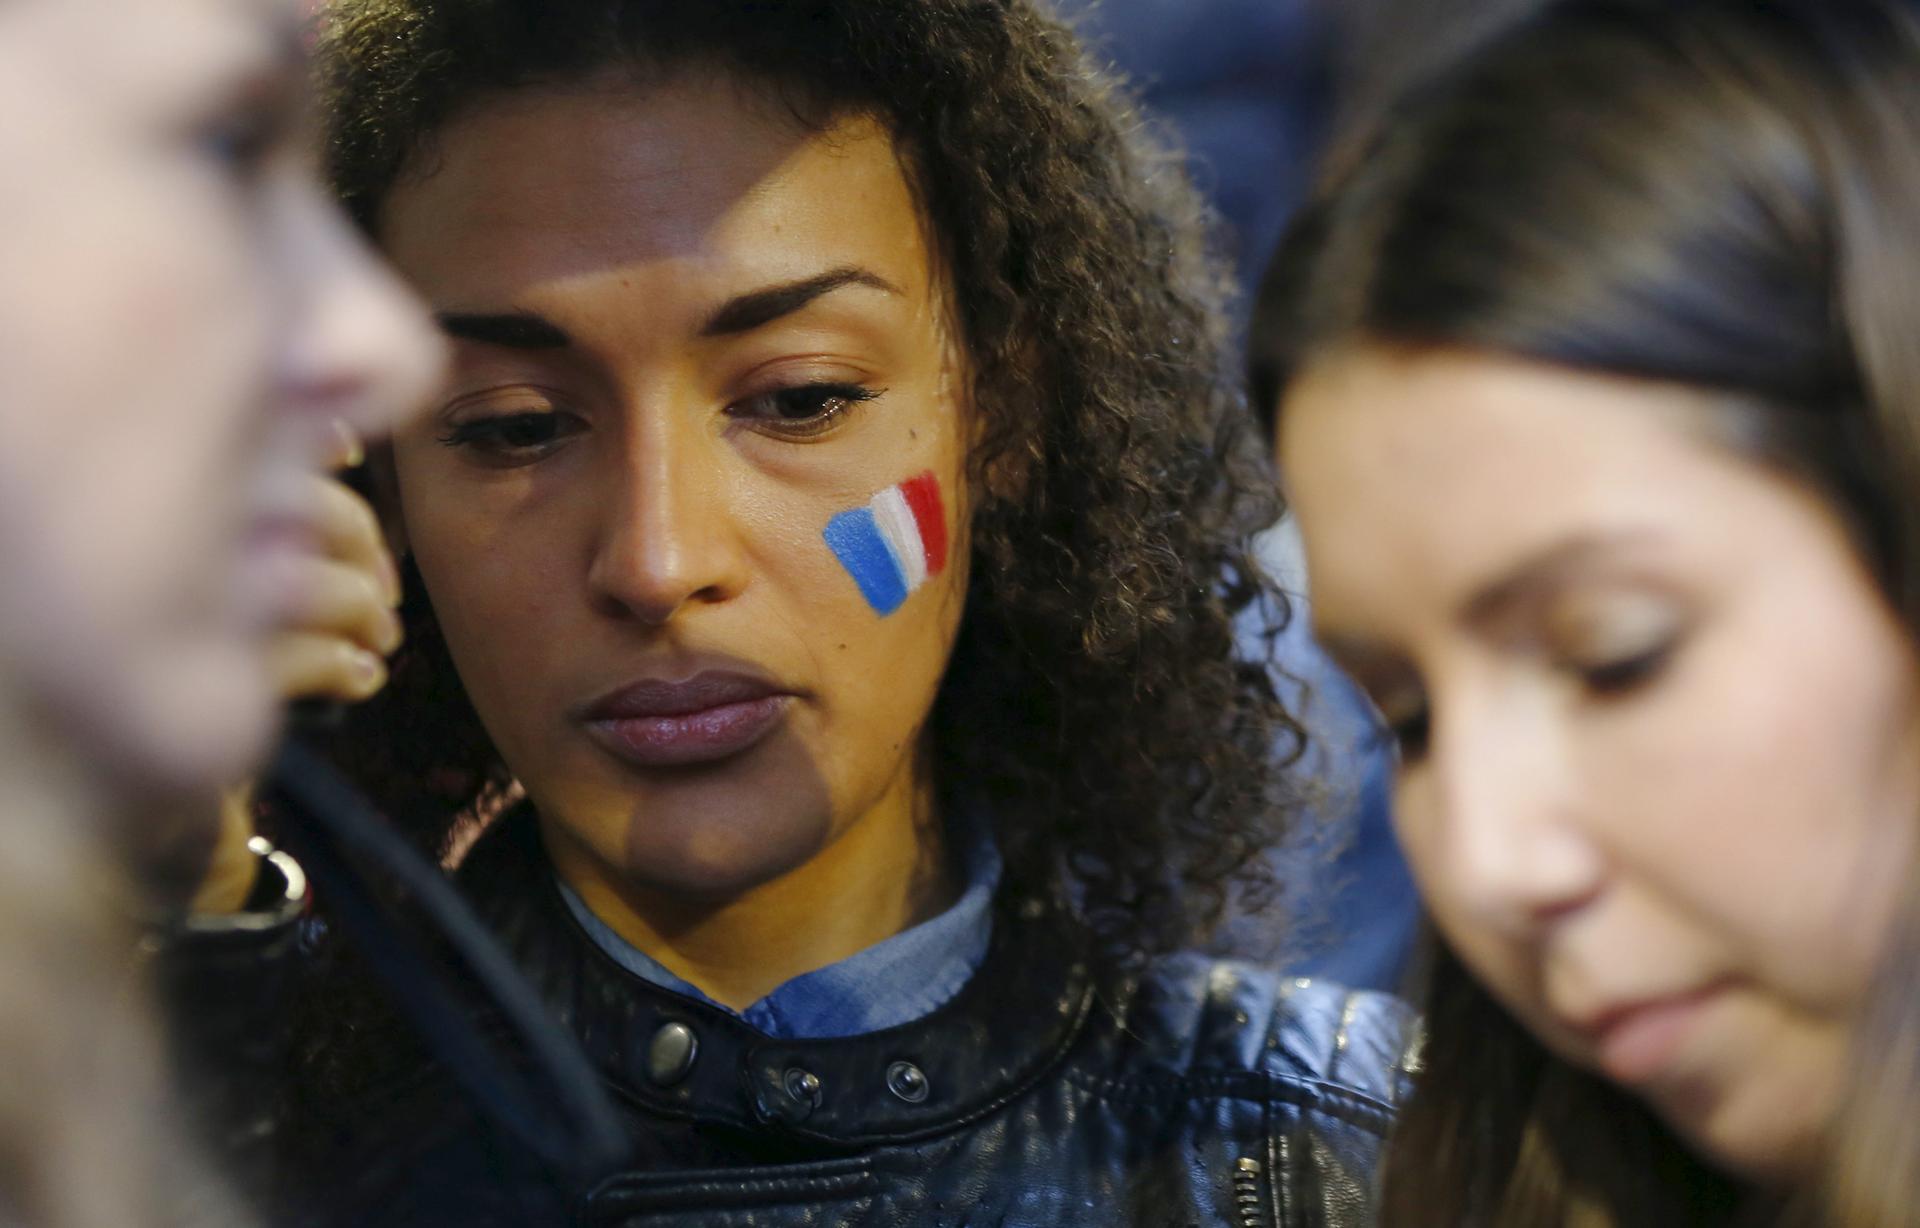 A woman wears the painted colours of France's national flag on her cheek during a candlelight vigil for the victims of the Paris attacks, in Sydney, Australia, November 14, 2015.